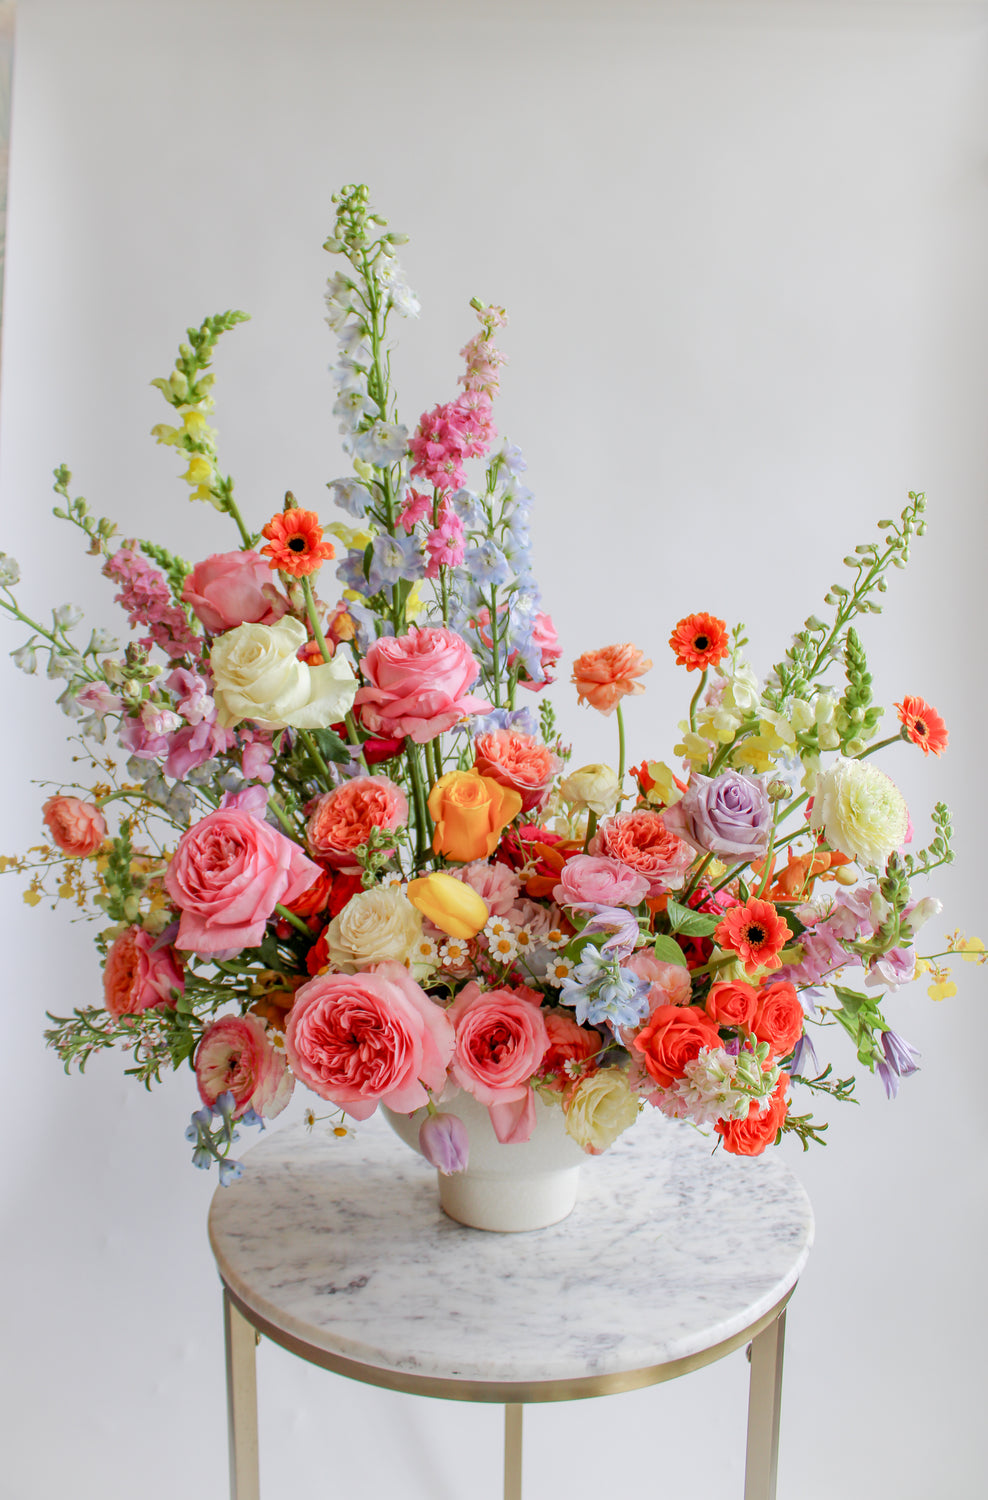 A flower arrangement in a glazed white compote vase in front of a white backdrop on a marble table. It's filled with pink, yellow, peach, orange, blue, purple, and white-colored flowers, including rose, ranunculus,, piccolini daisy, tulip, oncidium orchid, chamomile, snapdragon, and delphinium. The vibes are very Bridgerton.